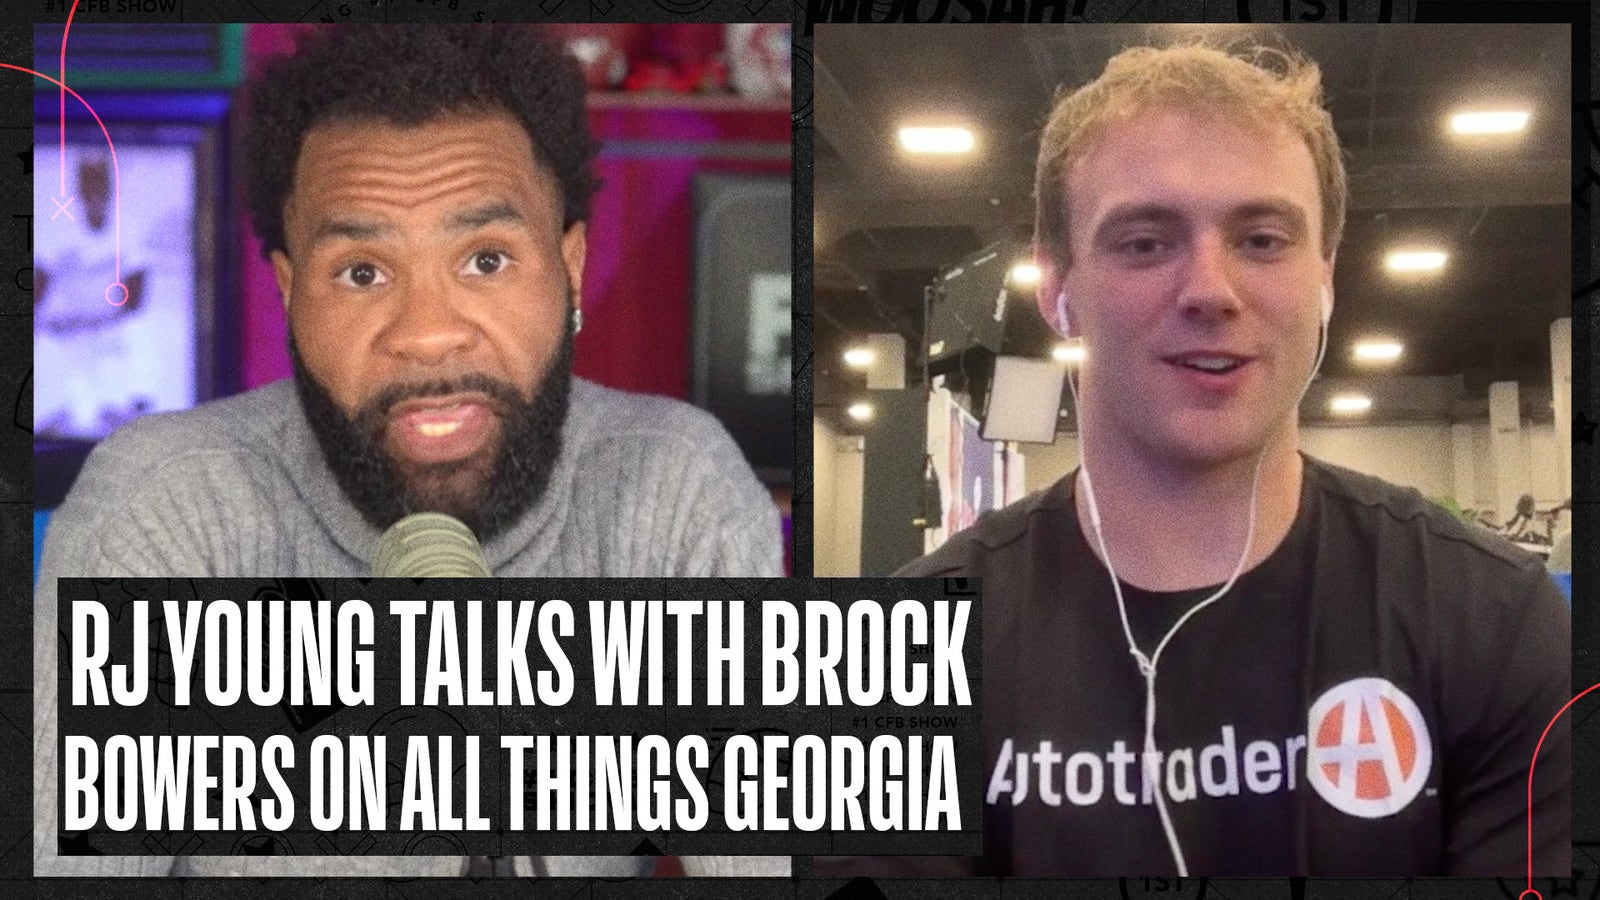 Former Georgia TE Brock Bowers on his time at Georgia and preparing for the NFL Draft